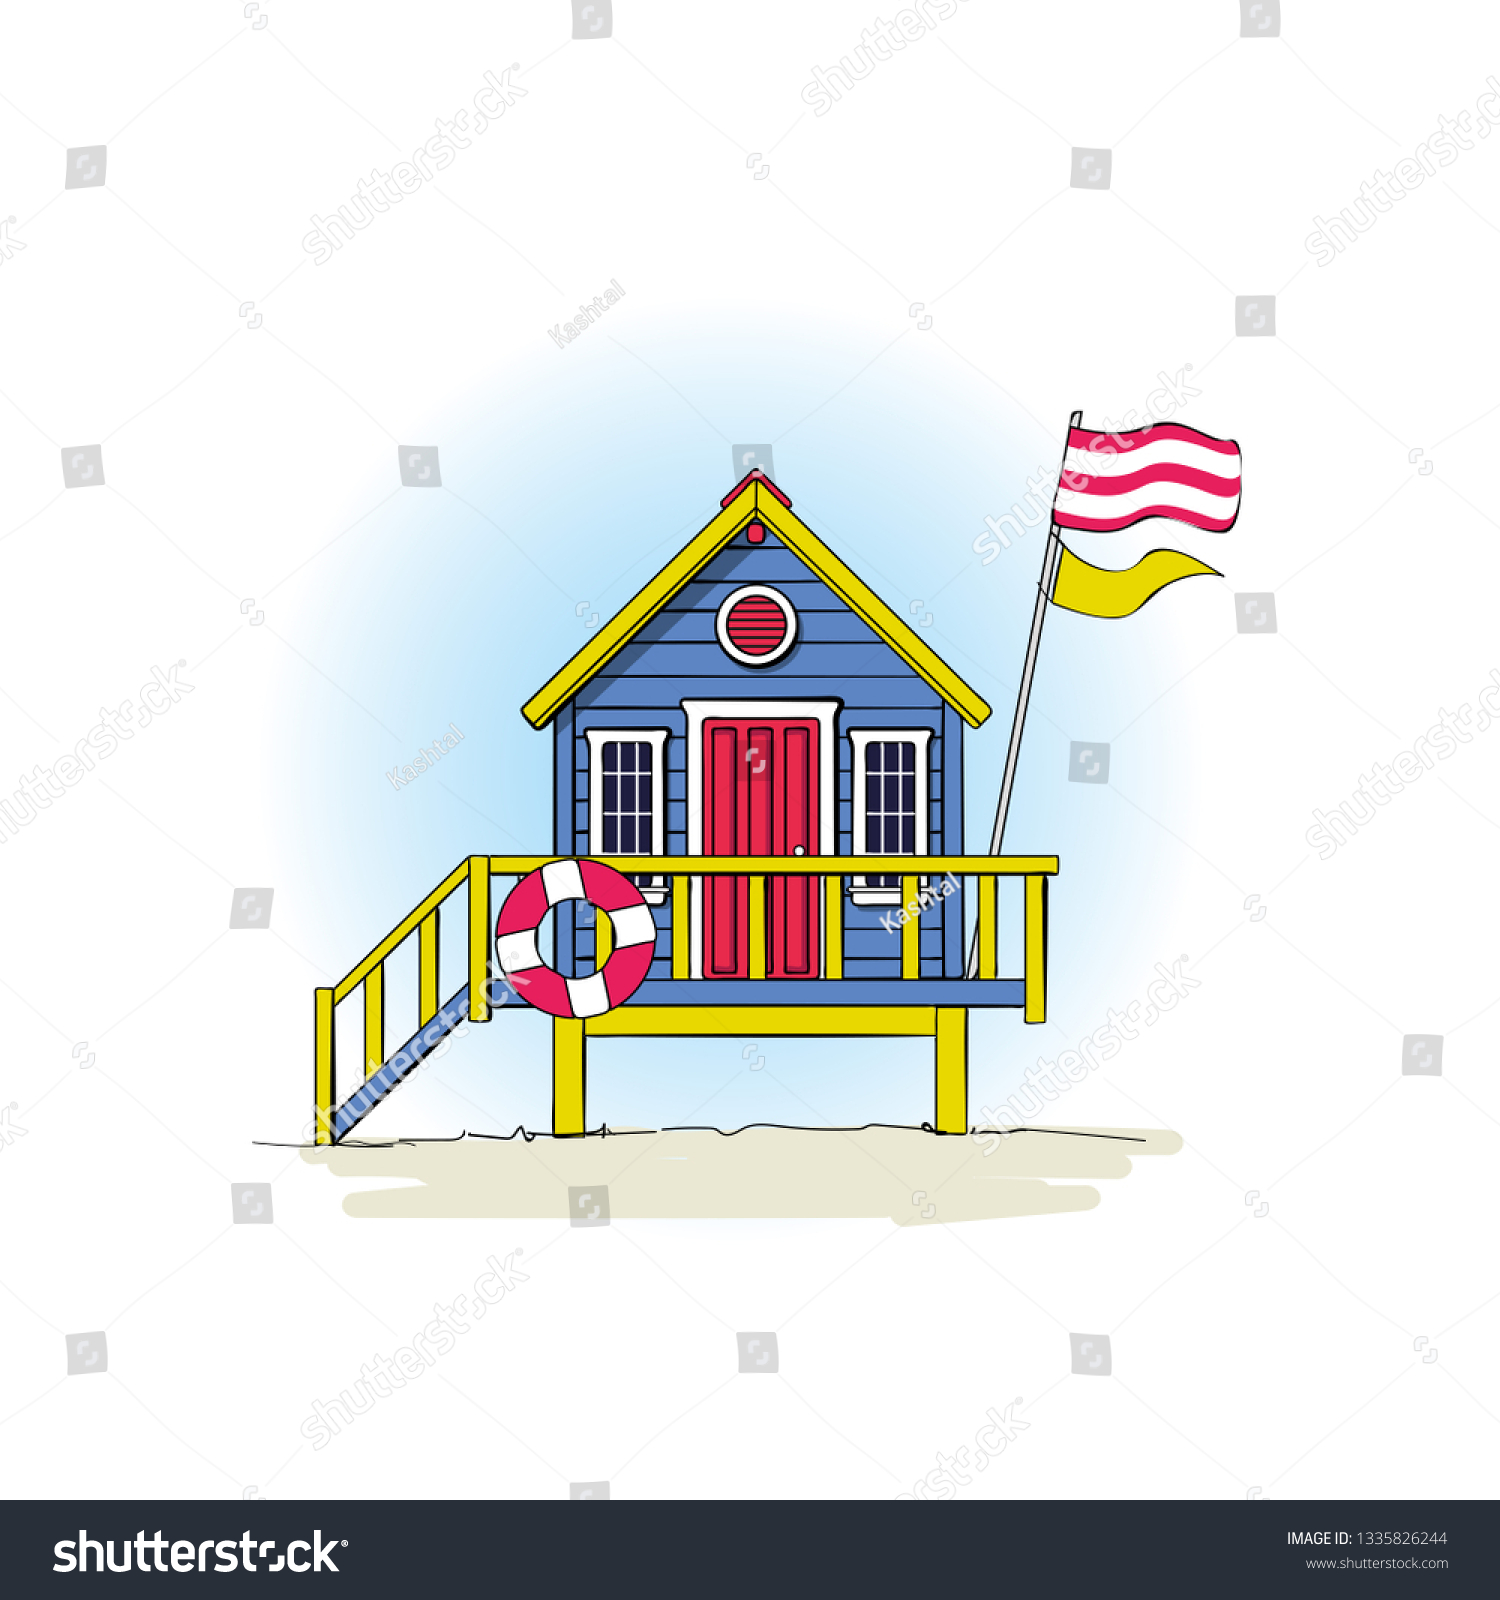 SVG of Lifeguard stations icon.Flat design.Beach lifeguard house logo or label template.Summer vector illustration svg